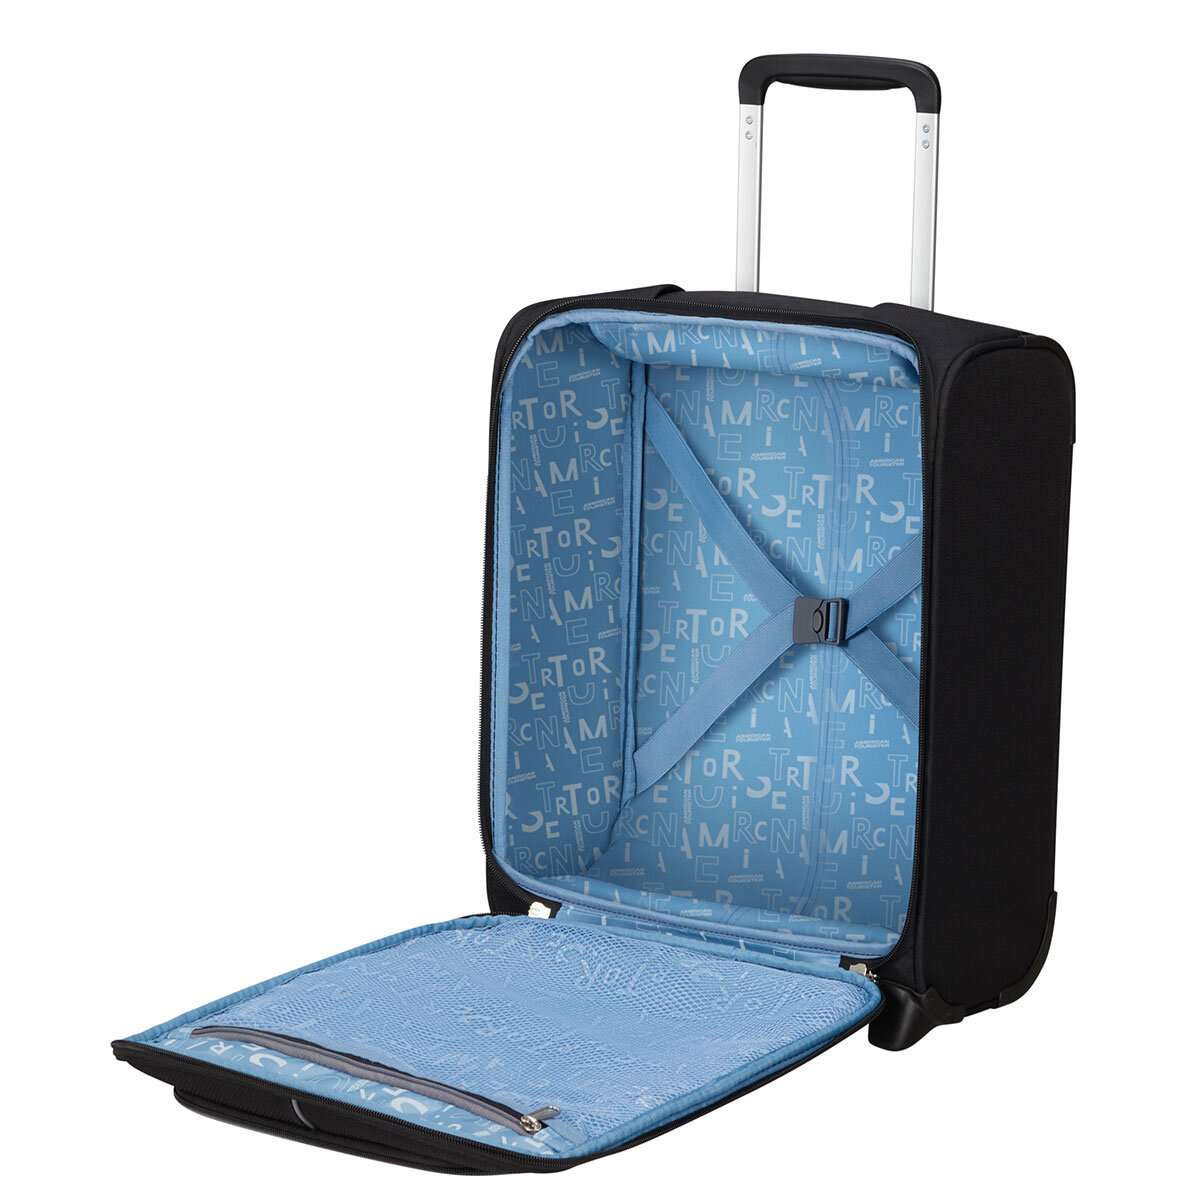 American Tourister Softside Underseater Carry On in Black